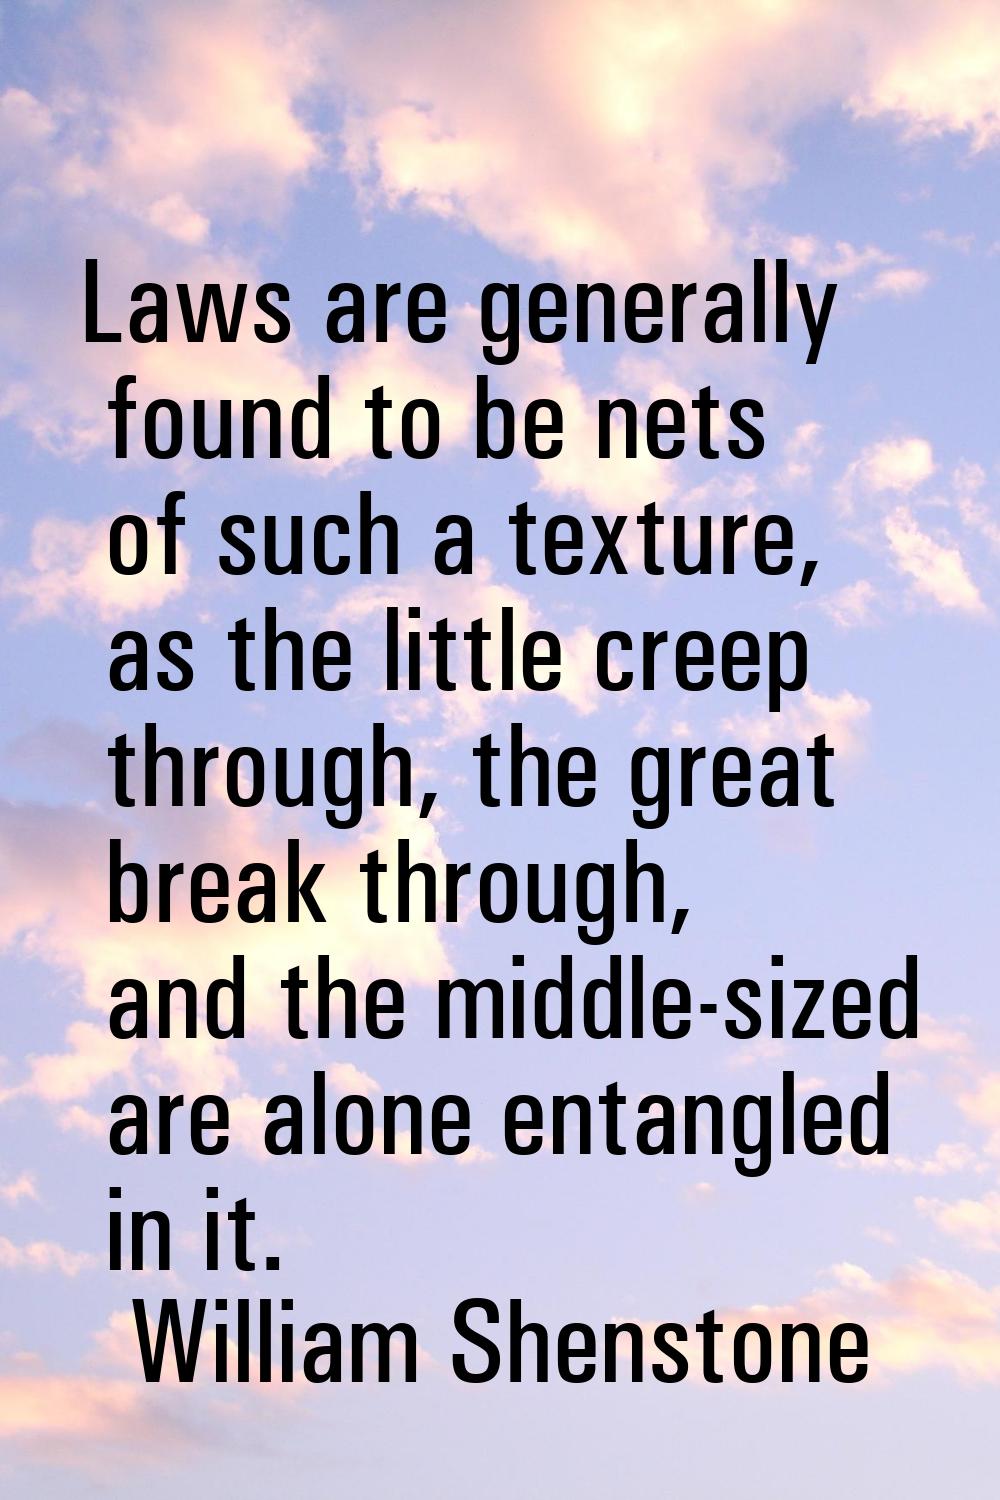 Laws are generally found to be nets of such a texture, as the little creep through, the great break